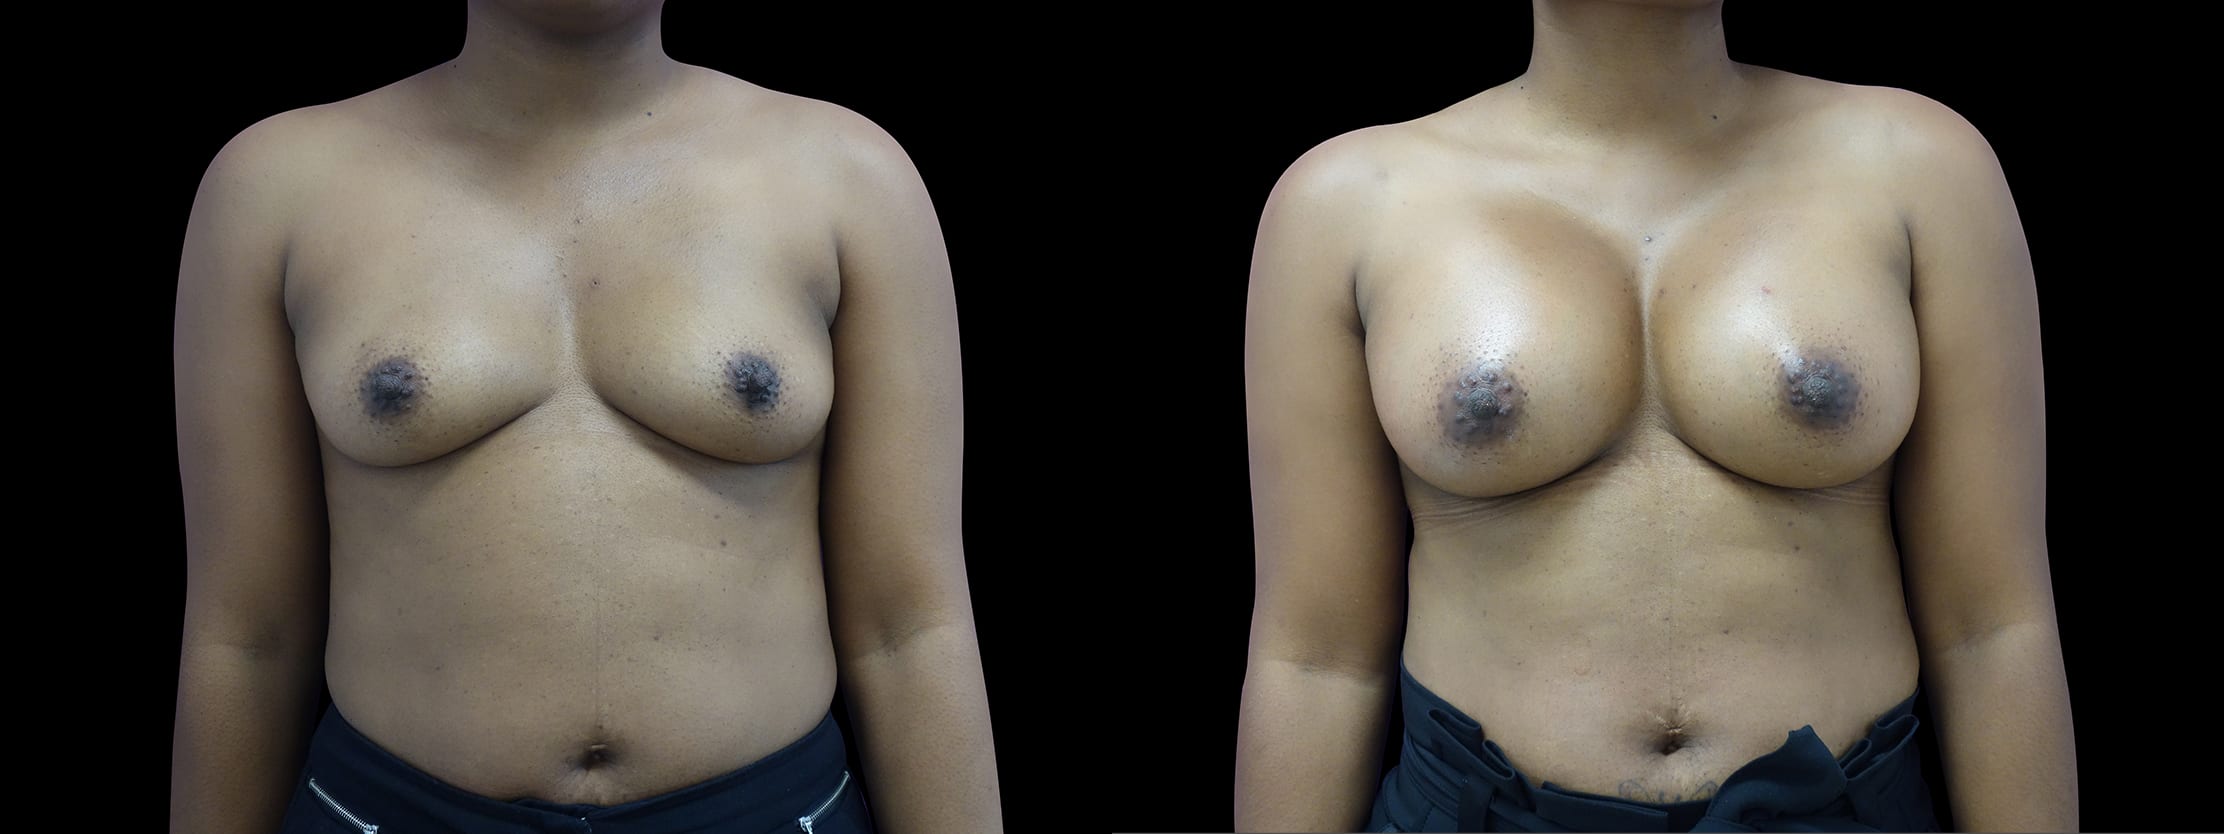 Procedure: Breast Augmentation with 475 CC silicone implants; High Profile....